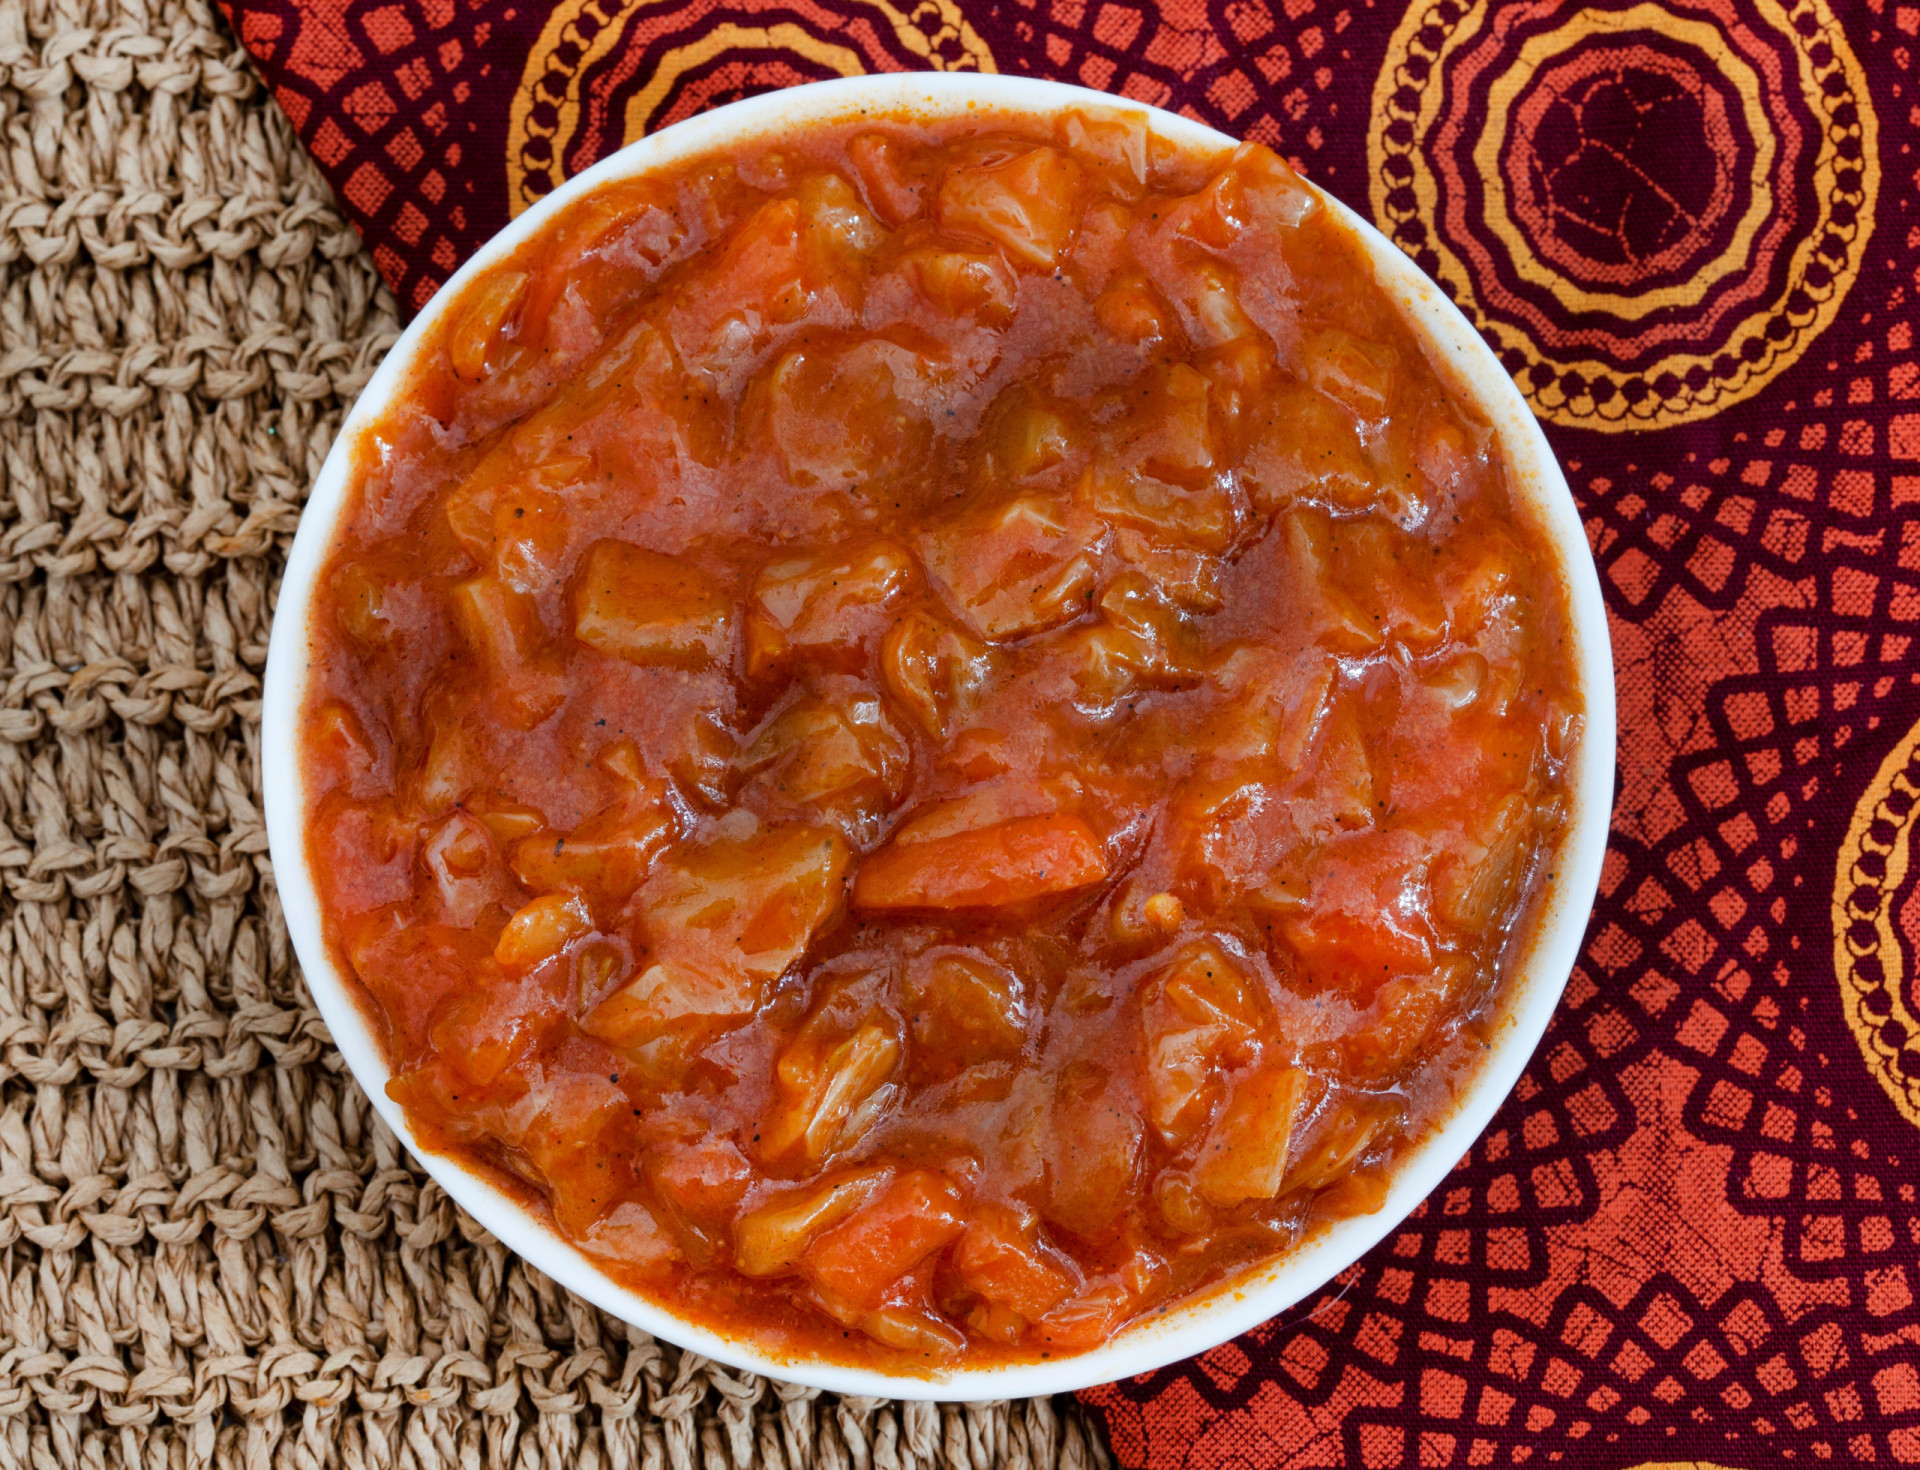 <p><span>Chakalaka is a South African vegetable relish made with tomatoes, peppers, onions, and beans. It'</span><span>s usually served</span><span> with grilled meats or pap.</span></p><p>You may also like:<a href="https://www.starsinsider.com/n/269256?utm_source=msn.com&utm_medium=display&utm_campaign=referral_description&utm_content=707039en-us"> What is the worst-rated show on British TV?</a></p>